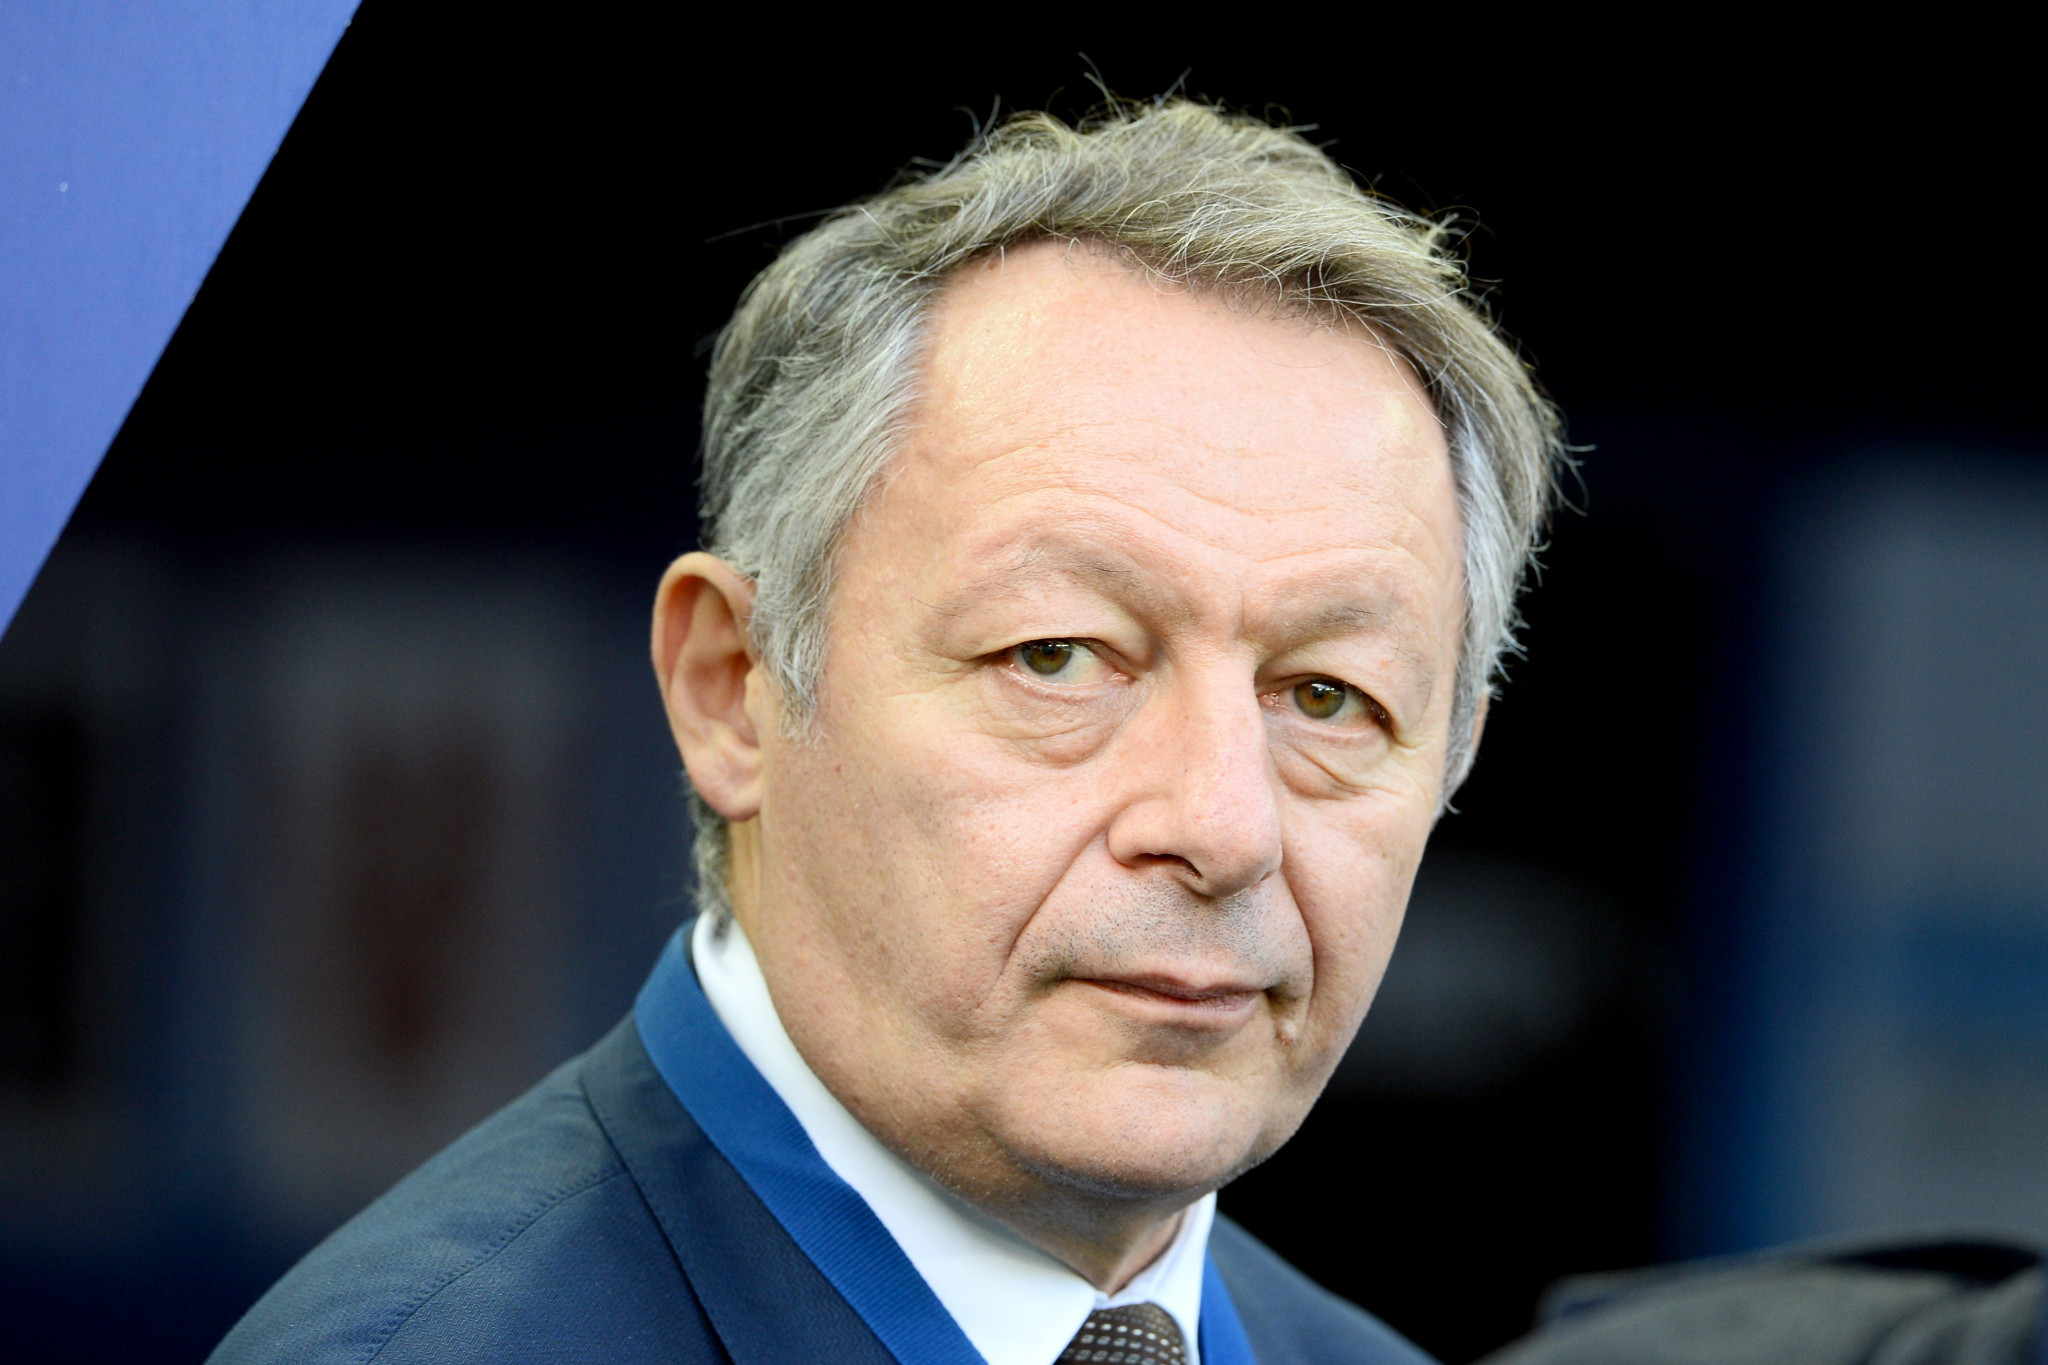 Thierry Braillard is the new President of the French Sport Foundation ©Getty Images